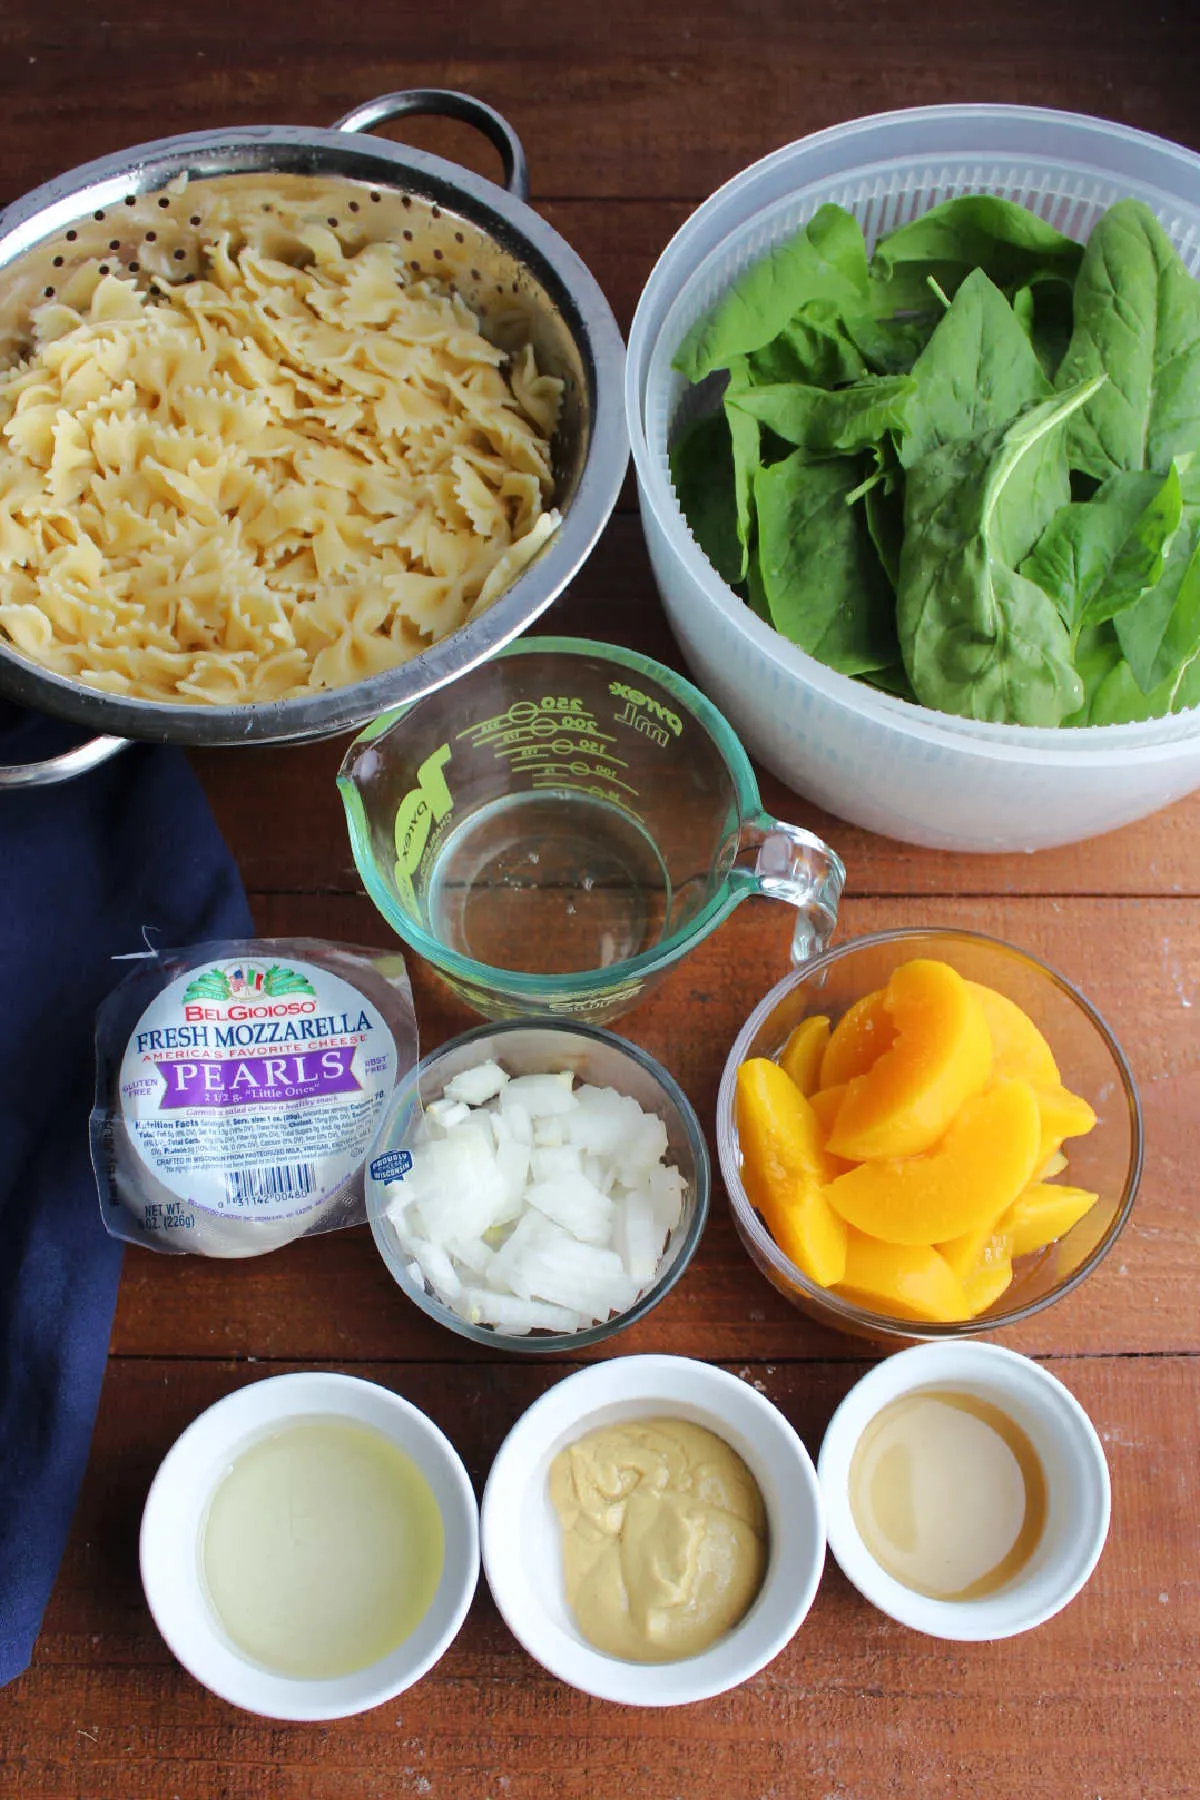 Ingredients including pasta, spinach, peaches, mustard, oil, vinegar, and diced onion.